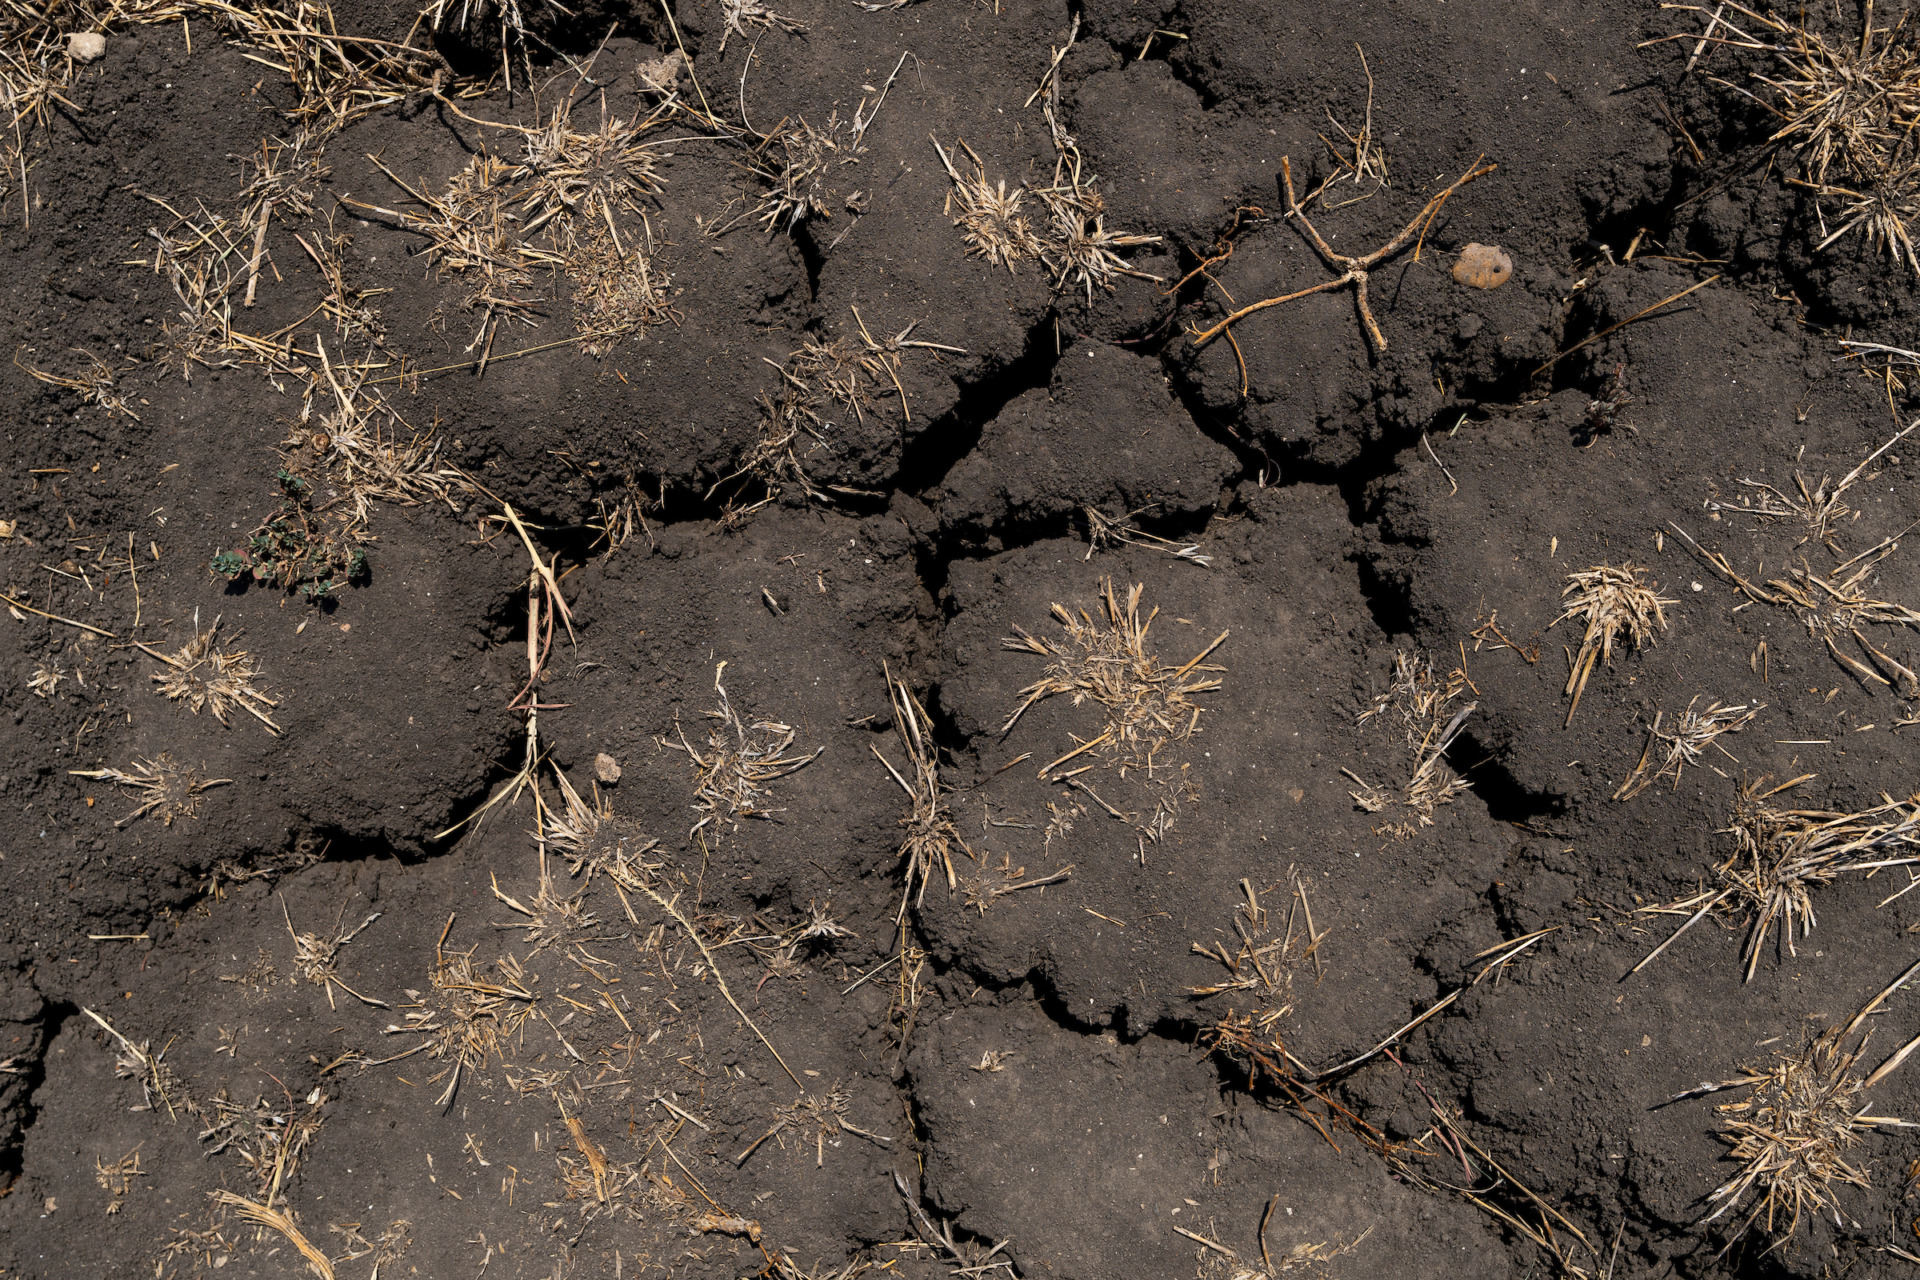 Texas A&M AgriLife research included in global drought study